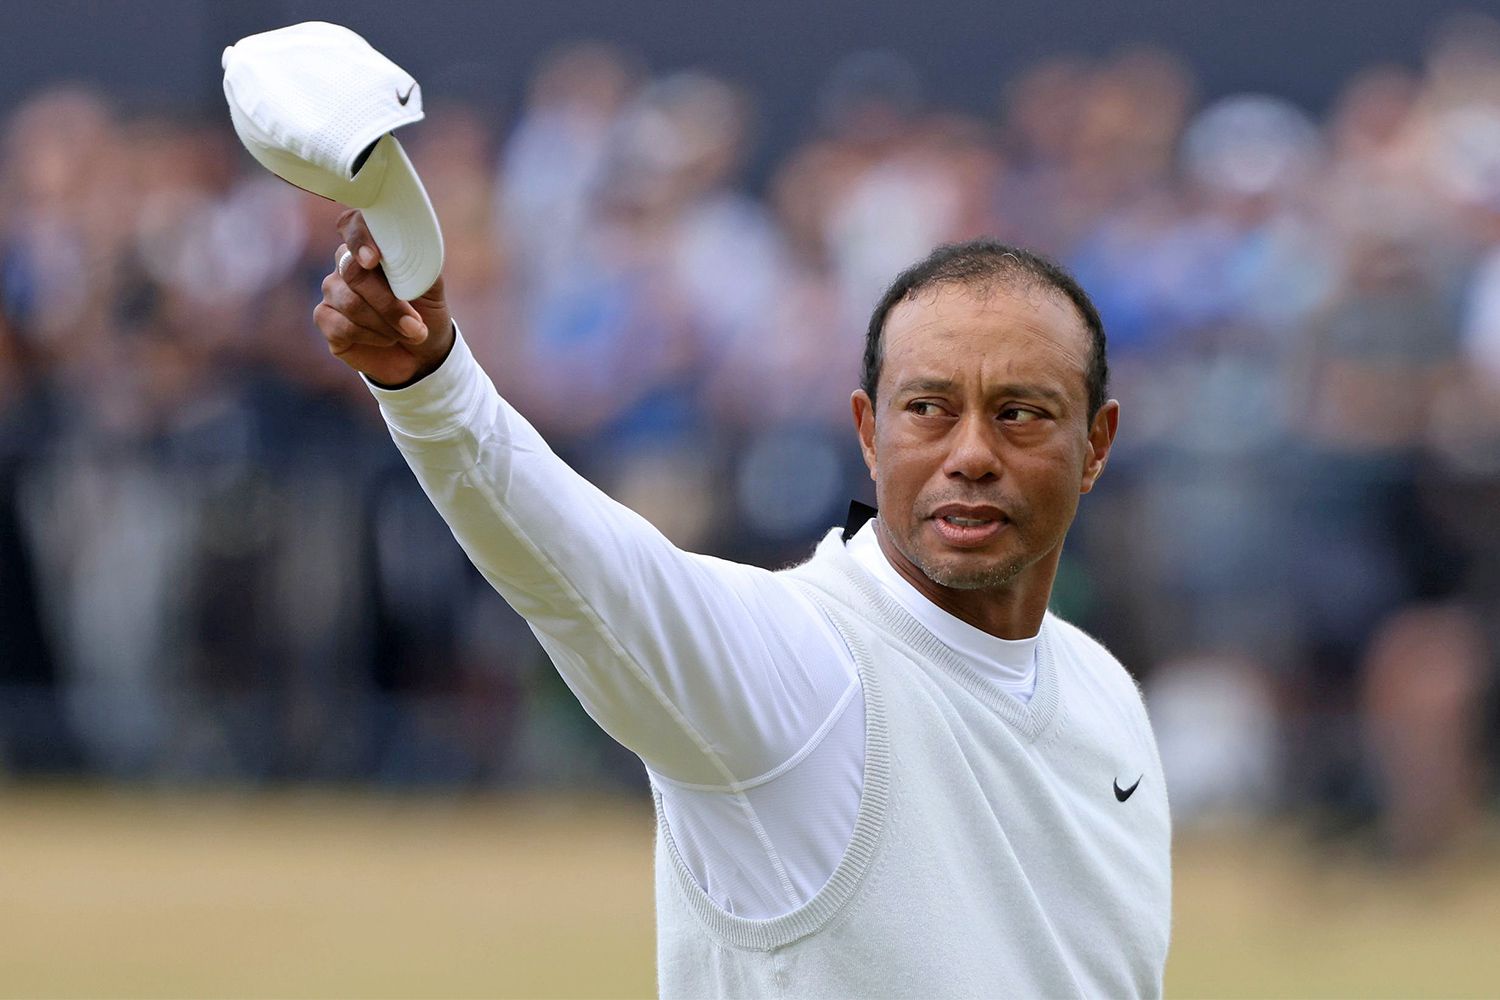 Photo: tiger woods retired from golf